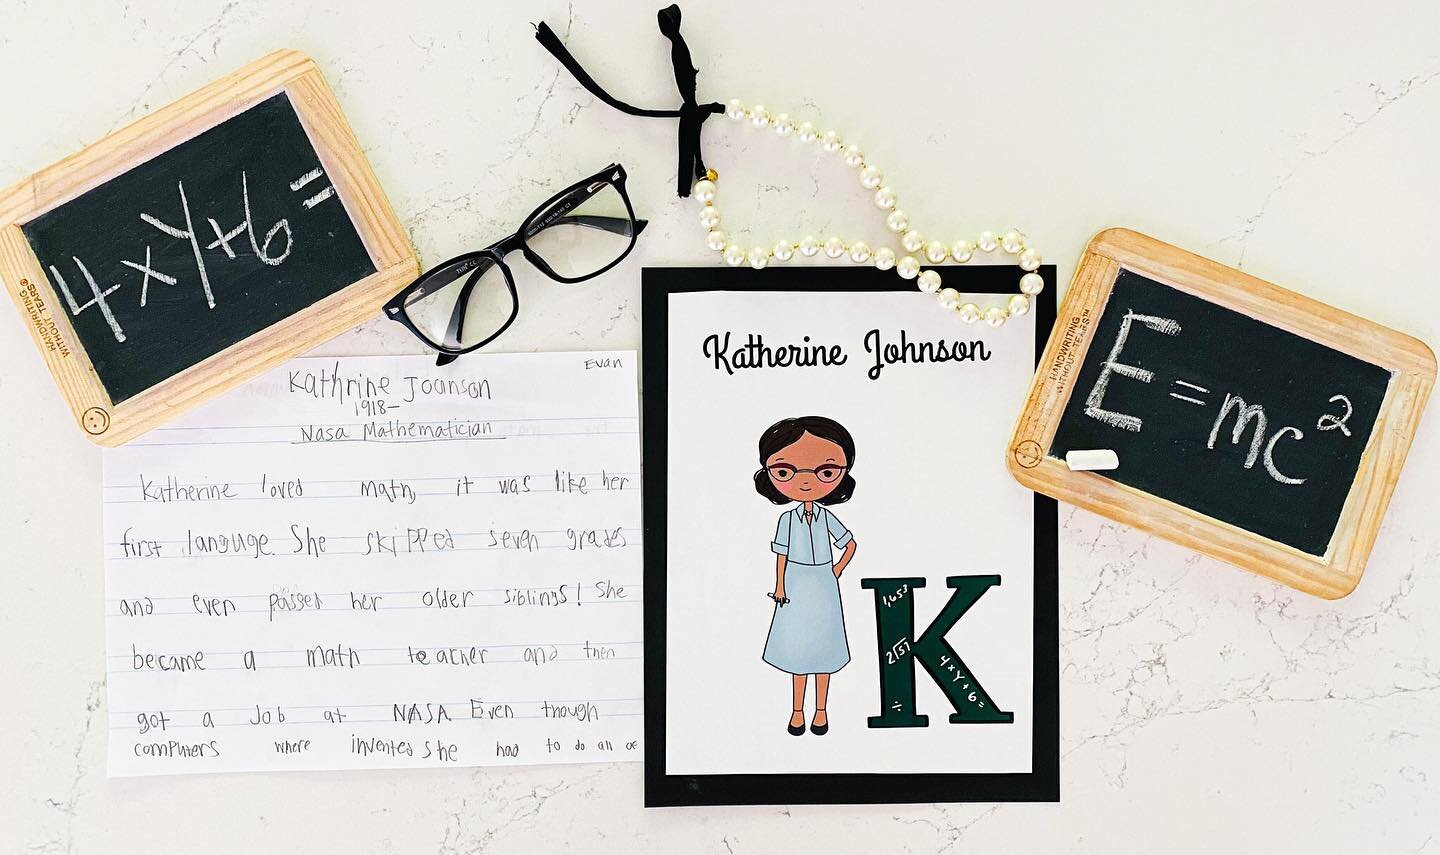 Wrapping up our month long celebration of Black History month with the amazing Katherine Johnson! 

Through our curated cross-curricular lesson, 3-5th grade students learned that Katherine Johnson&rsquo;s love language was math!&nbsp;&nbsp;She skippe